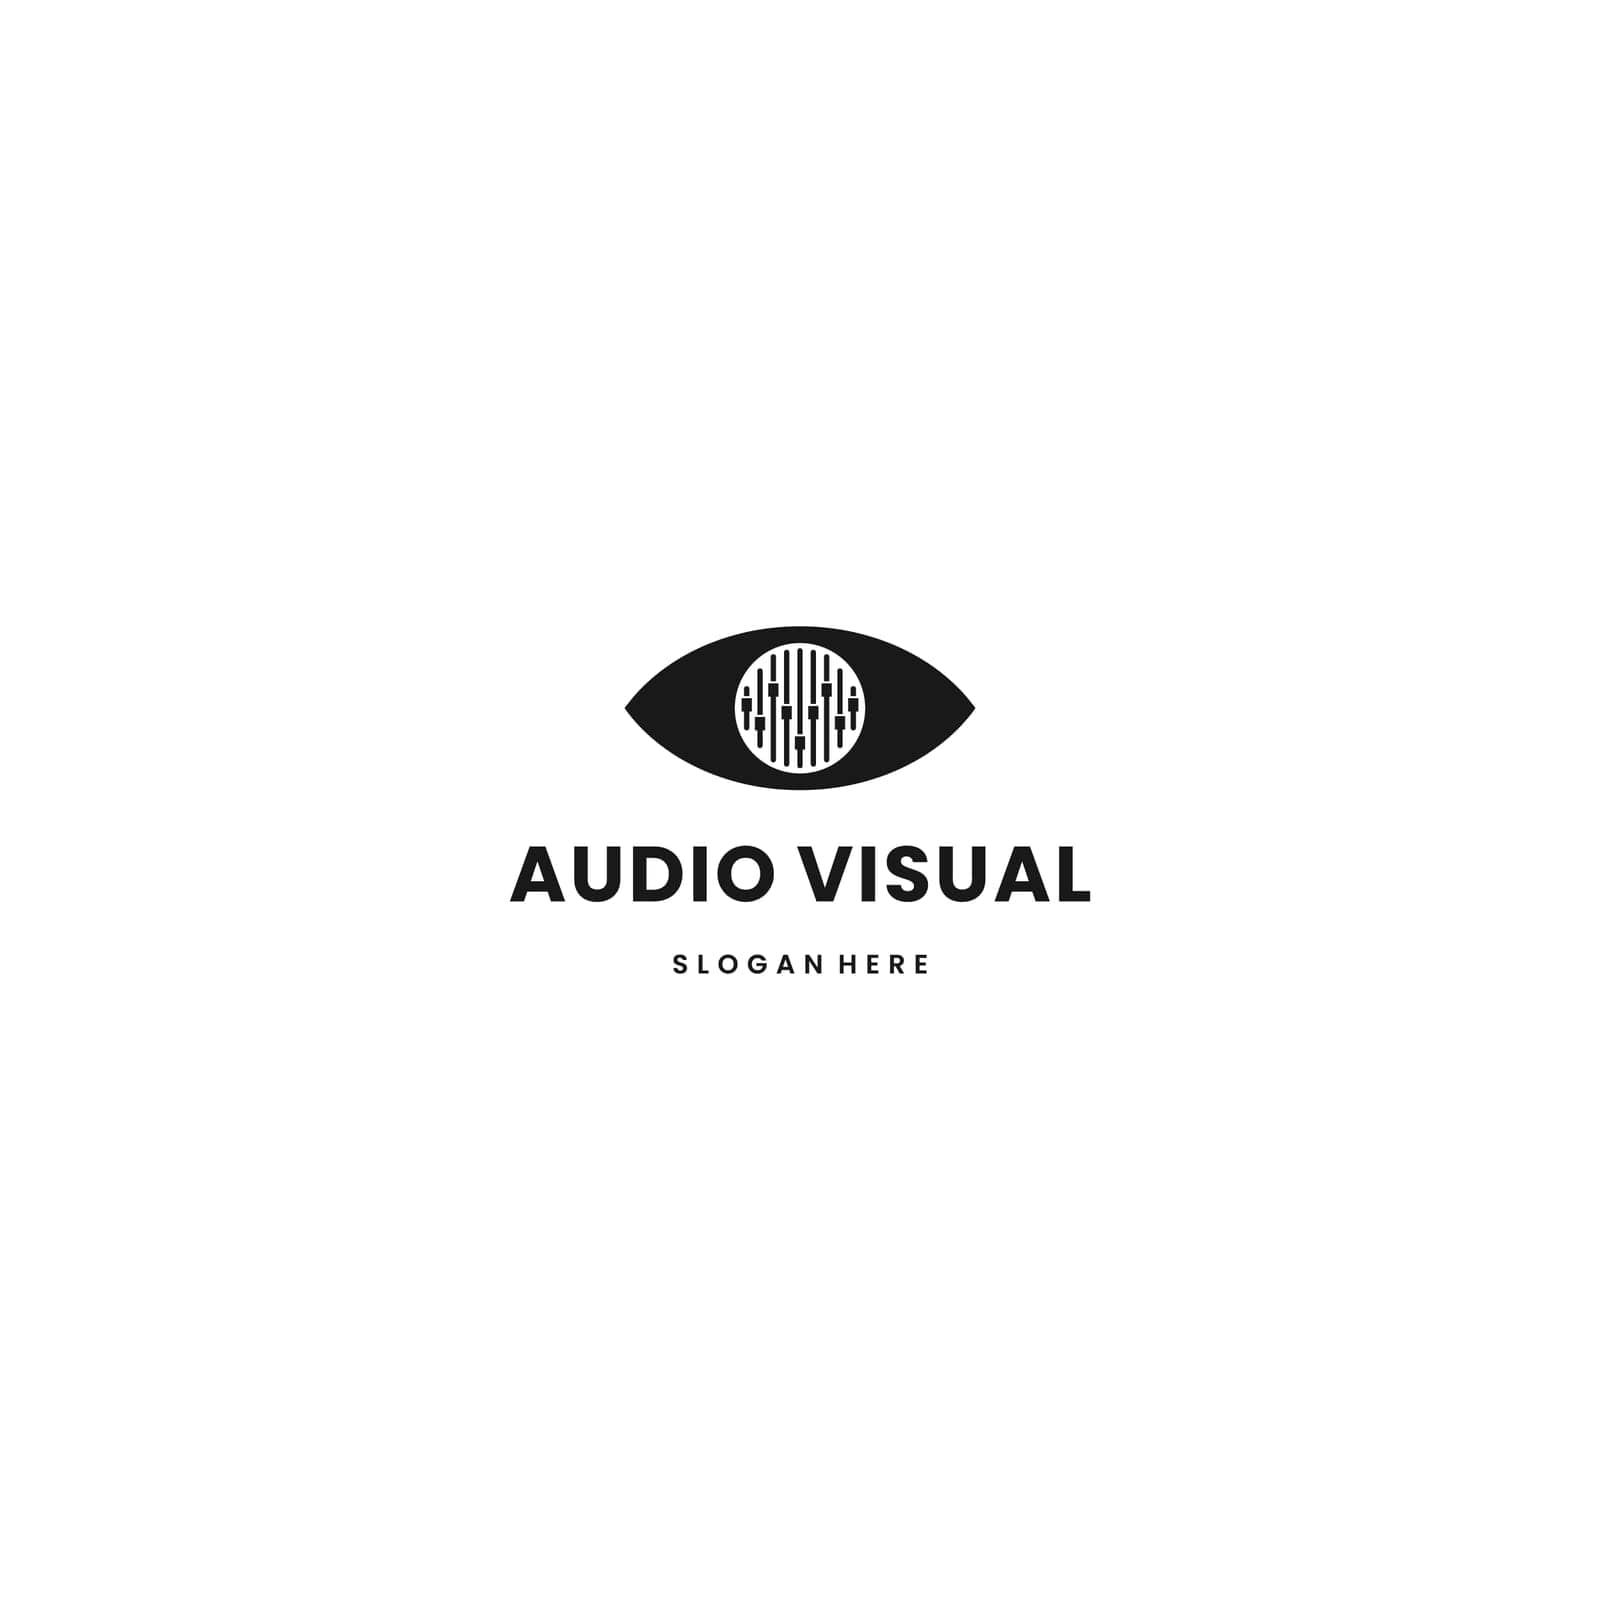 Audio visual logo design on isolated background by tanridai